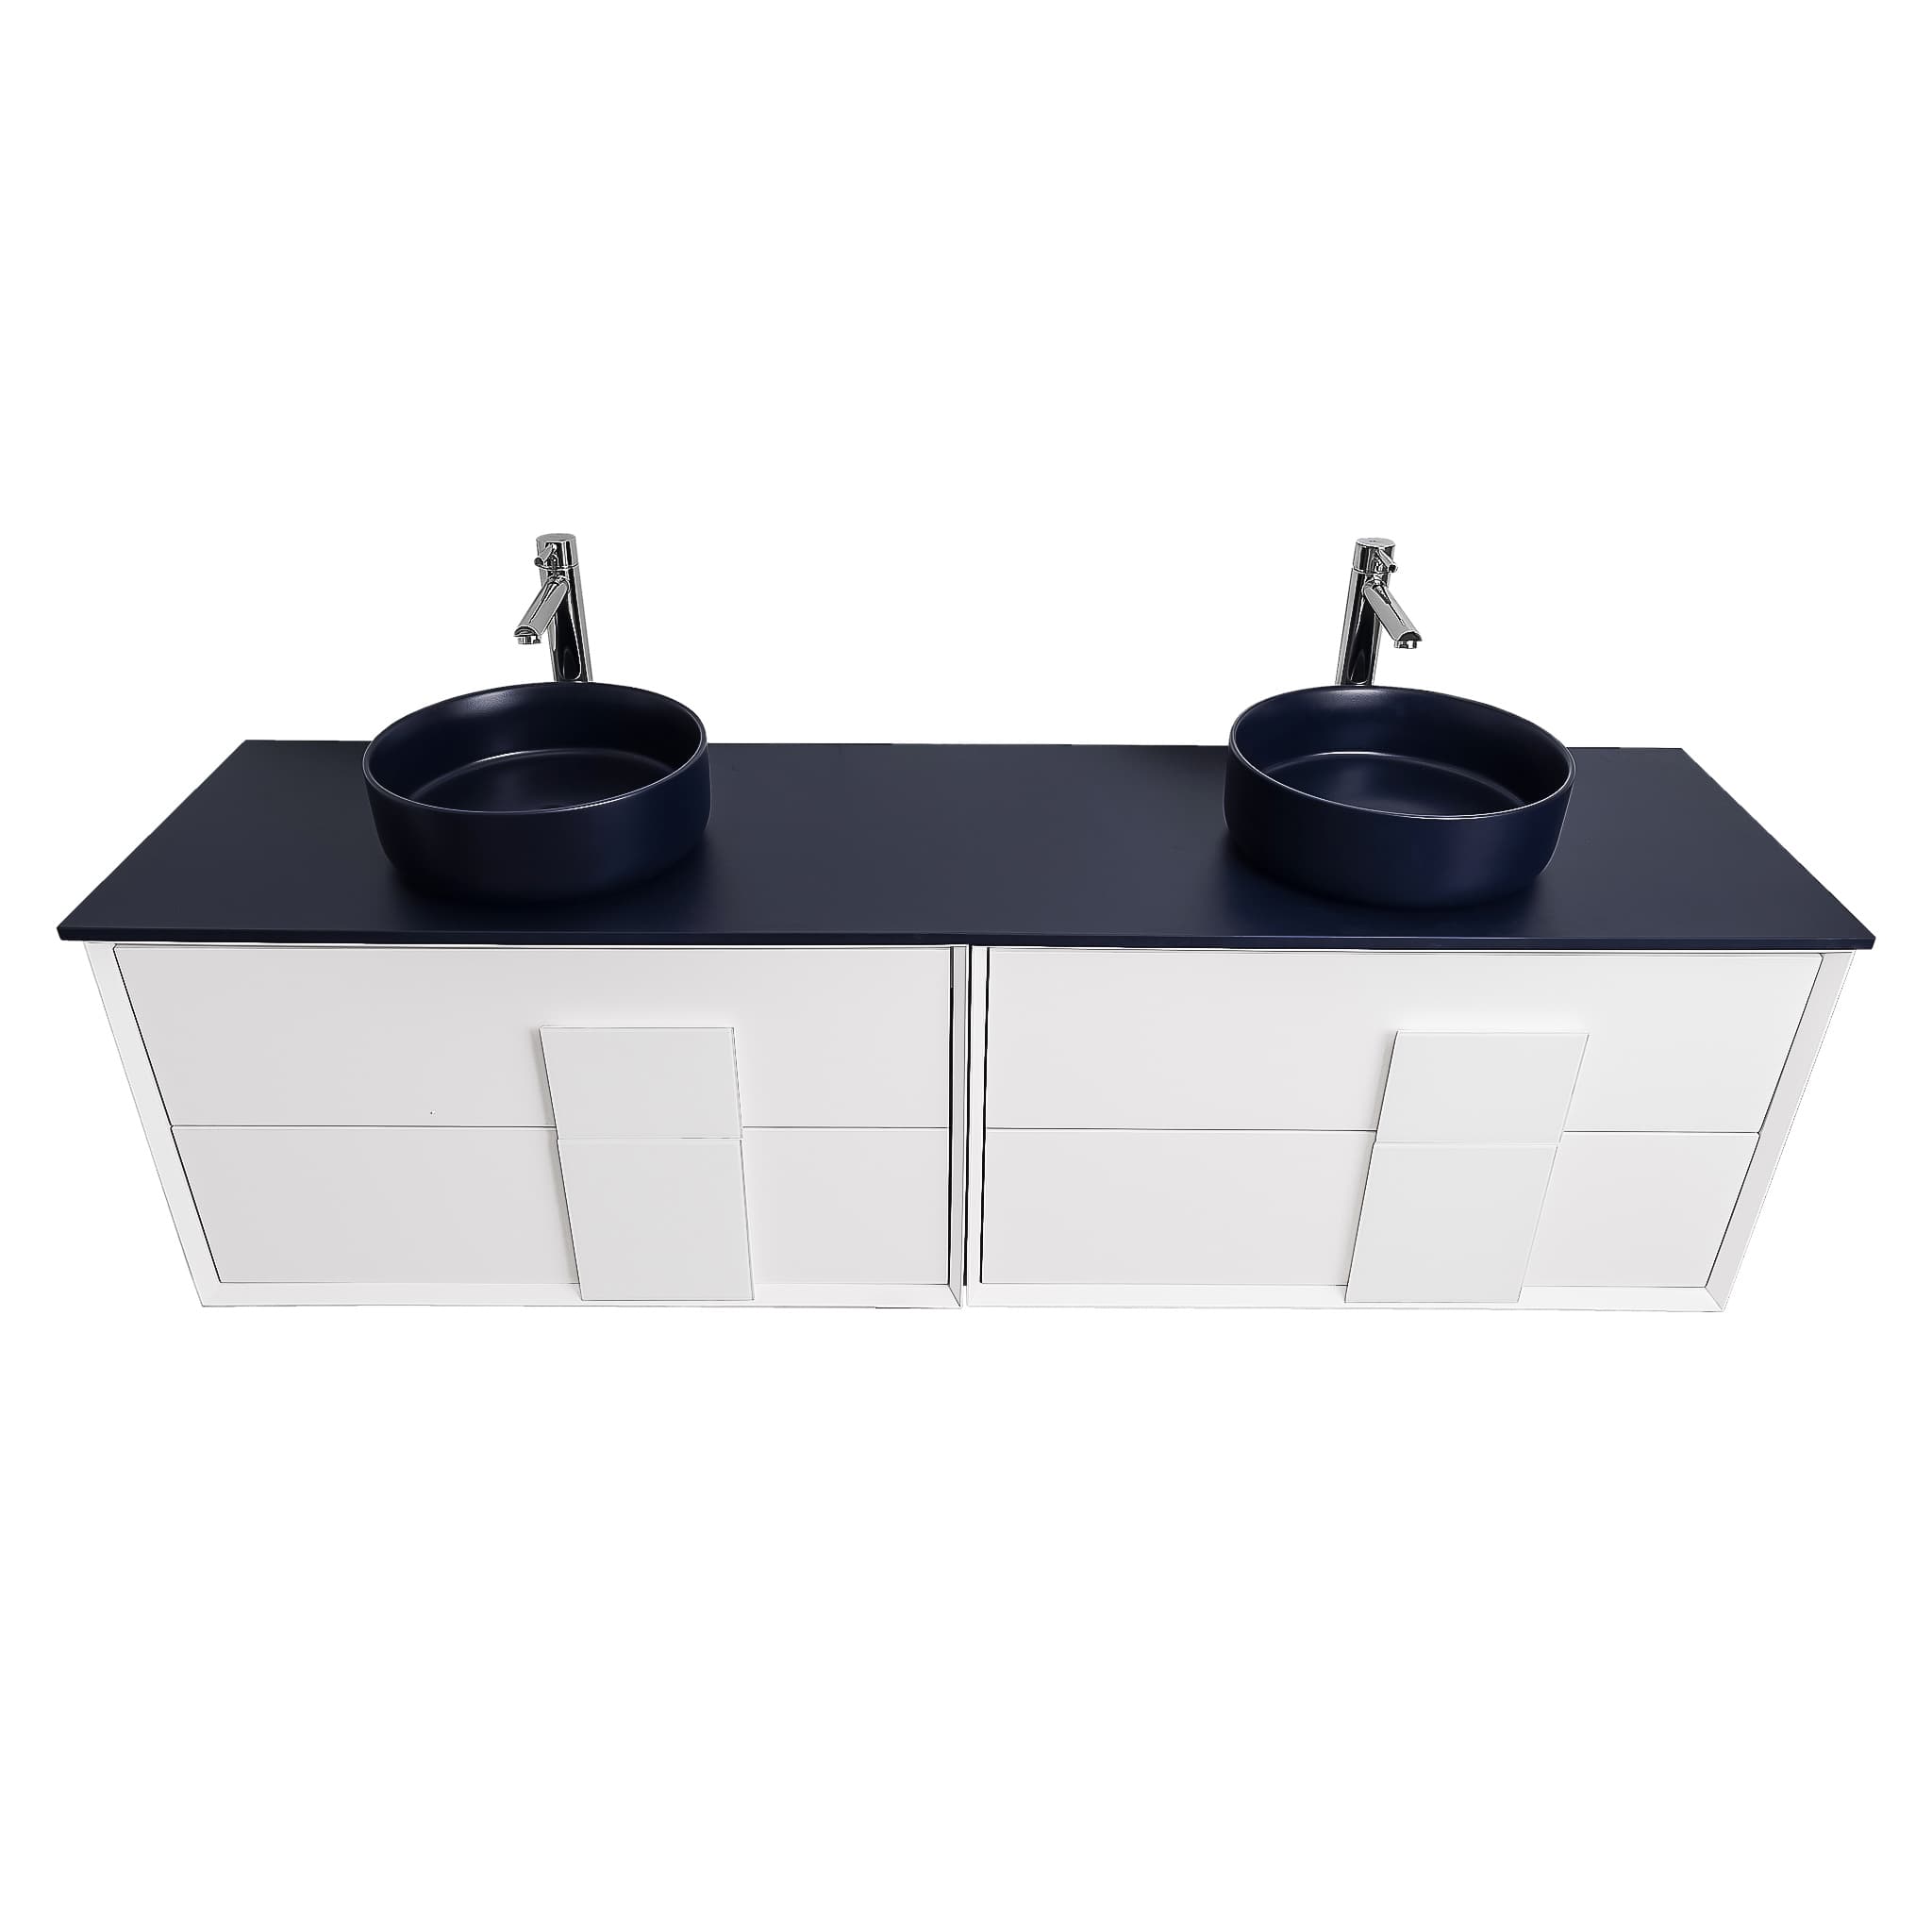 Piazza 63 Matte White With White Handle Cabinet, Ares Navy Blue Top and Two Ares Navy Blue Ceramic Basin, Wall Mounted Modern Vanity Set